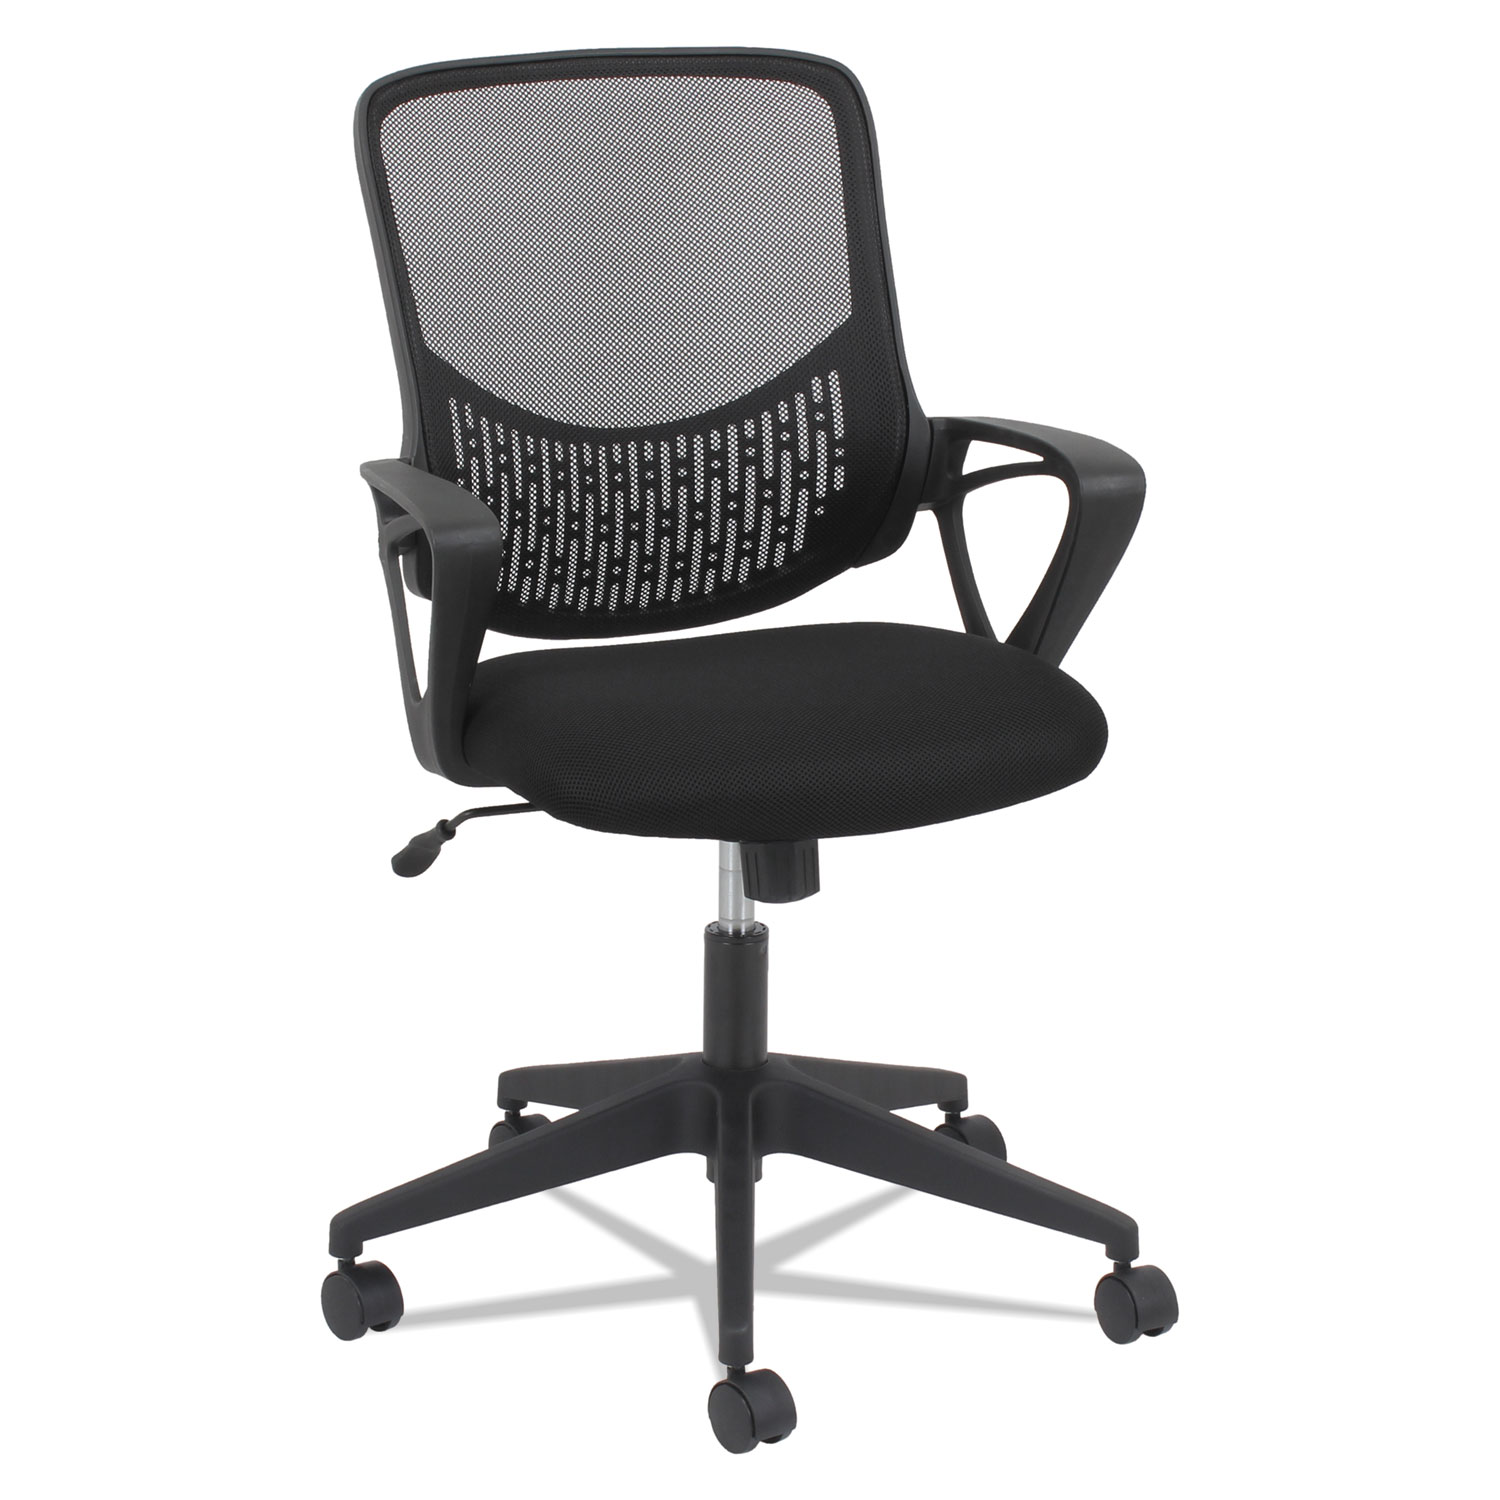  OIF OIFMK4718 Modern Mesh Task Chair, Supports up to 250 lbs., Black Seat/Black Back, Black Base (OIFMK4718) 